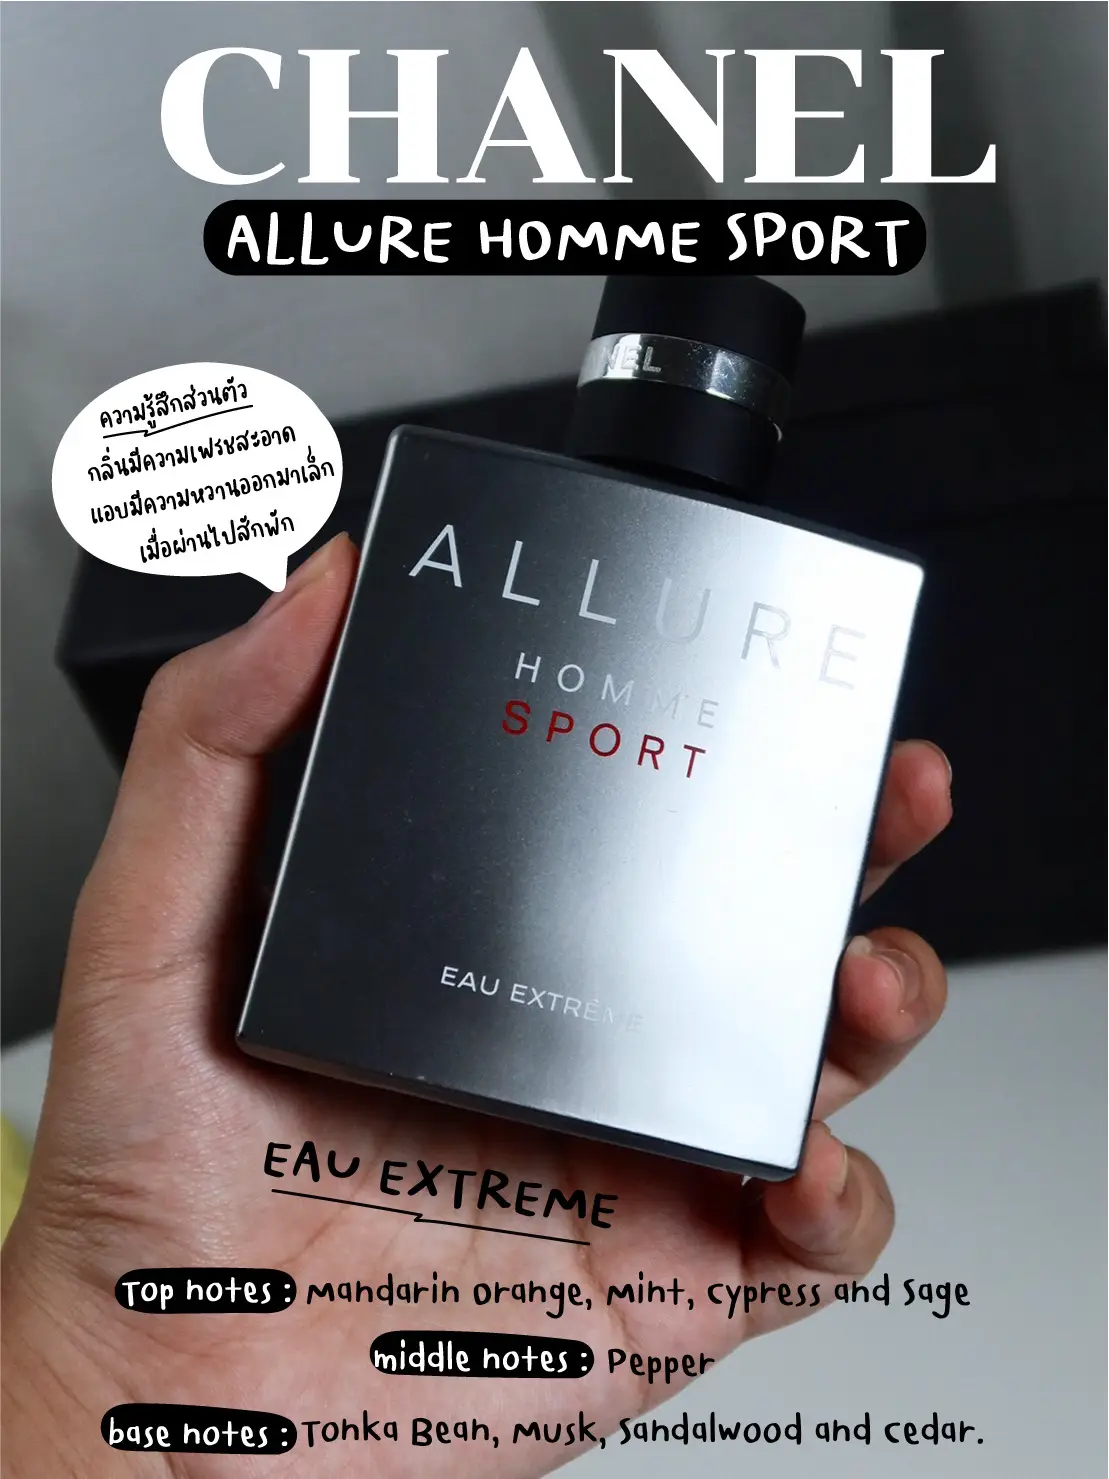 Allure Homme Sport Eau Extreme Cologne by Chanel